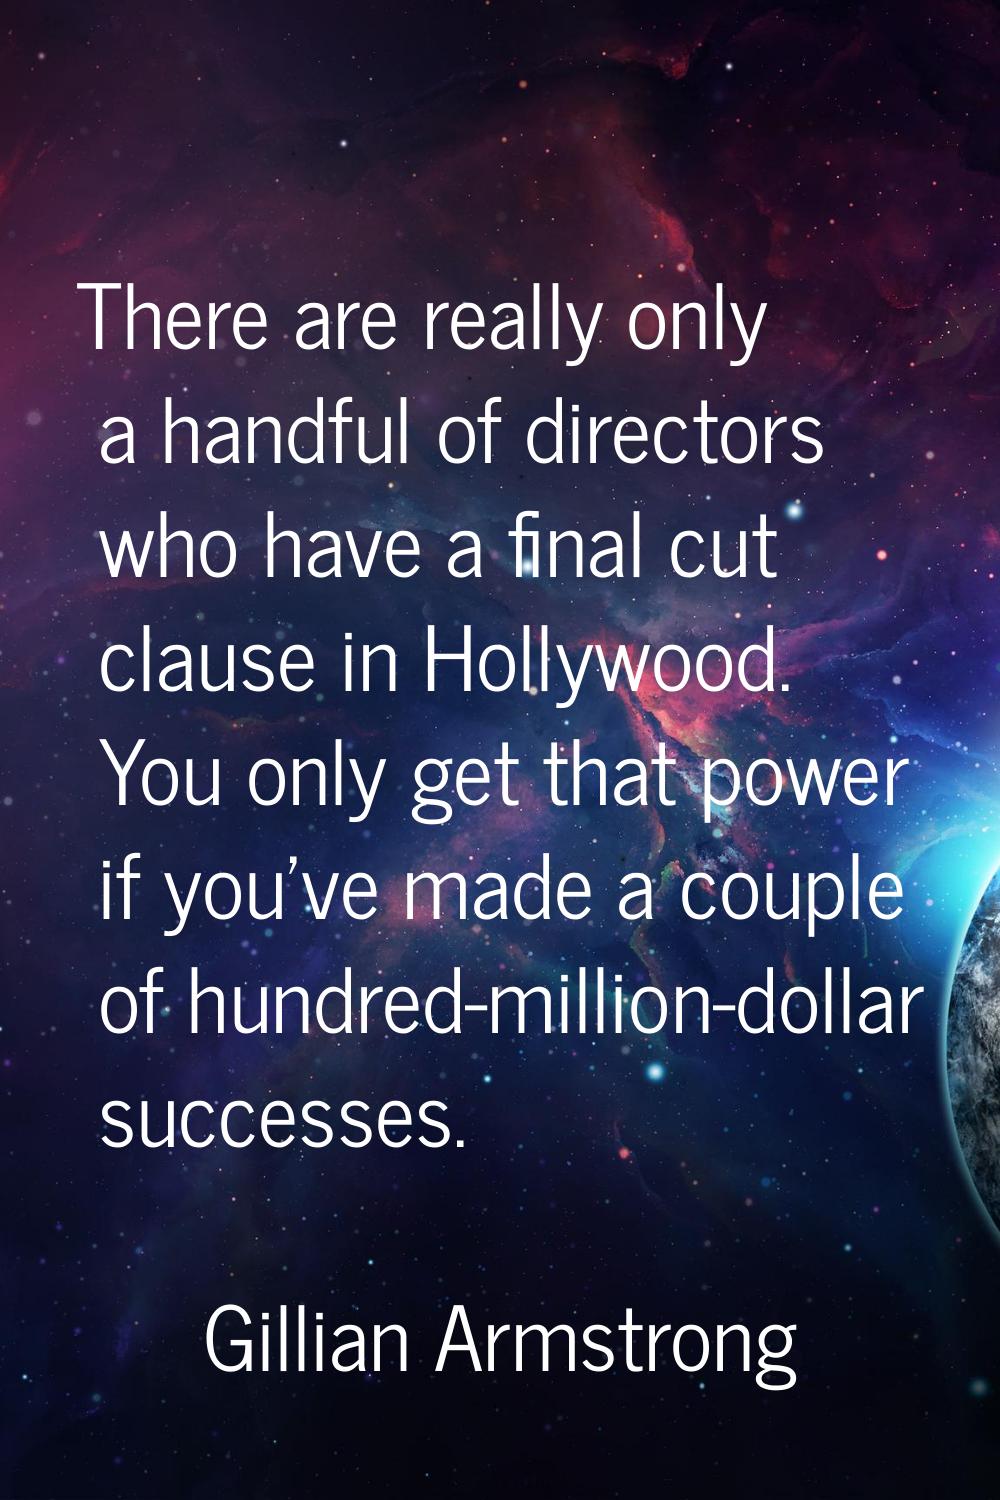 There are really only a handful of directors who have a final cut clause in Hollywood. You only get